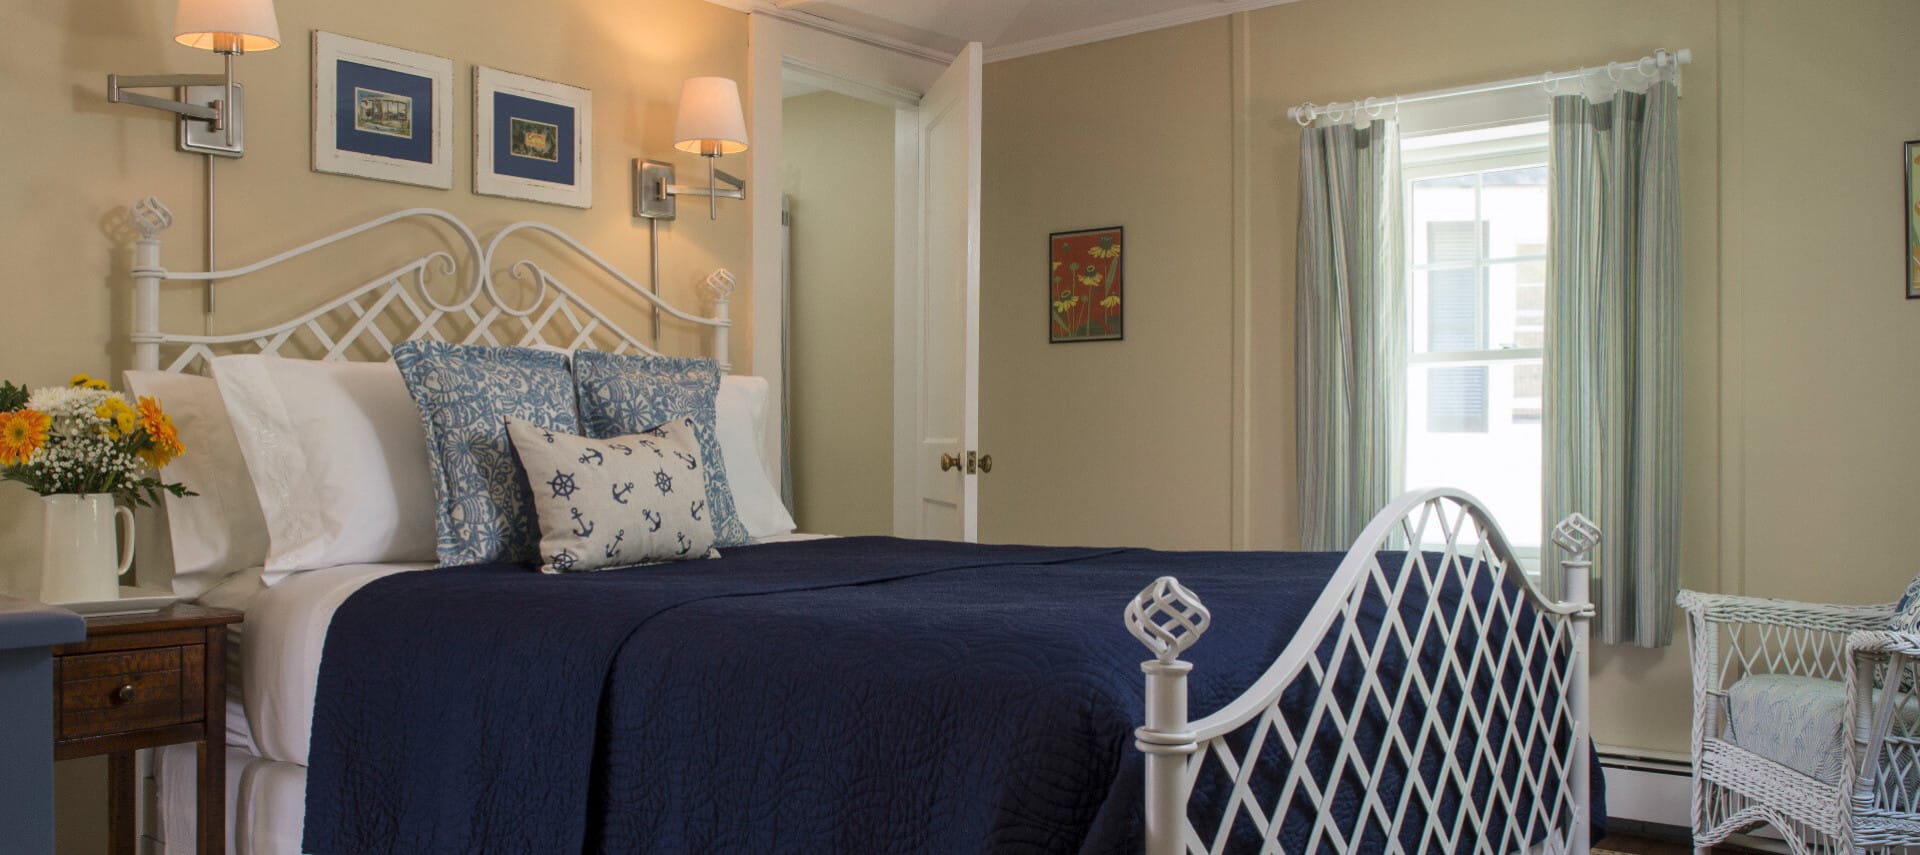 Cozy warm bedroom with a white iron bed made up in navy blue with a blur dresser and white wicker chair.